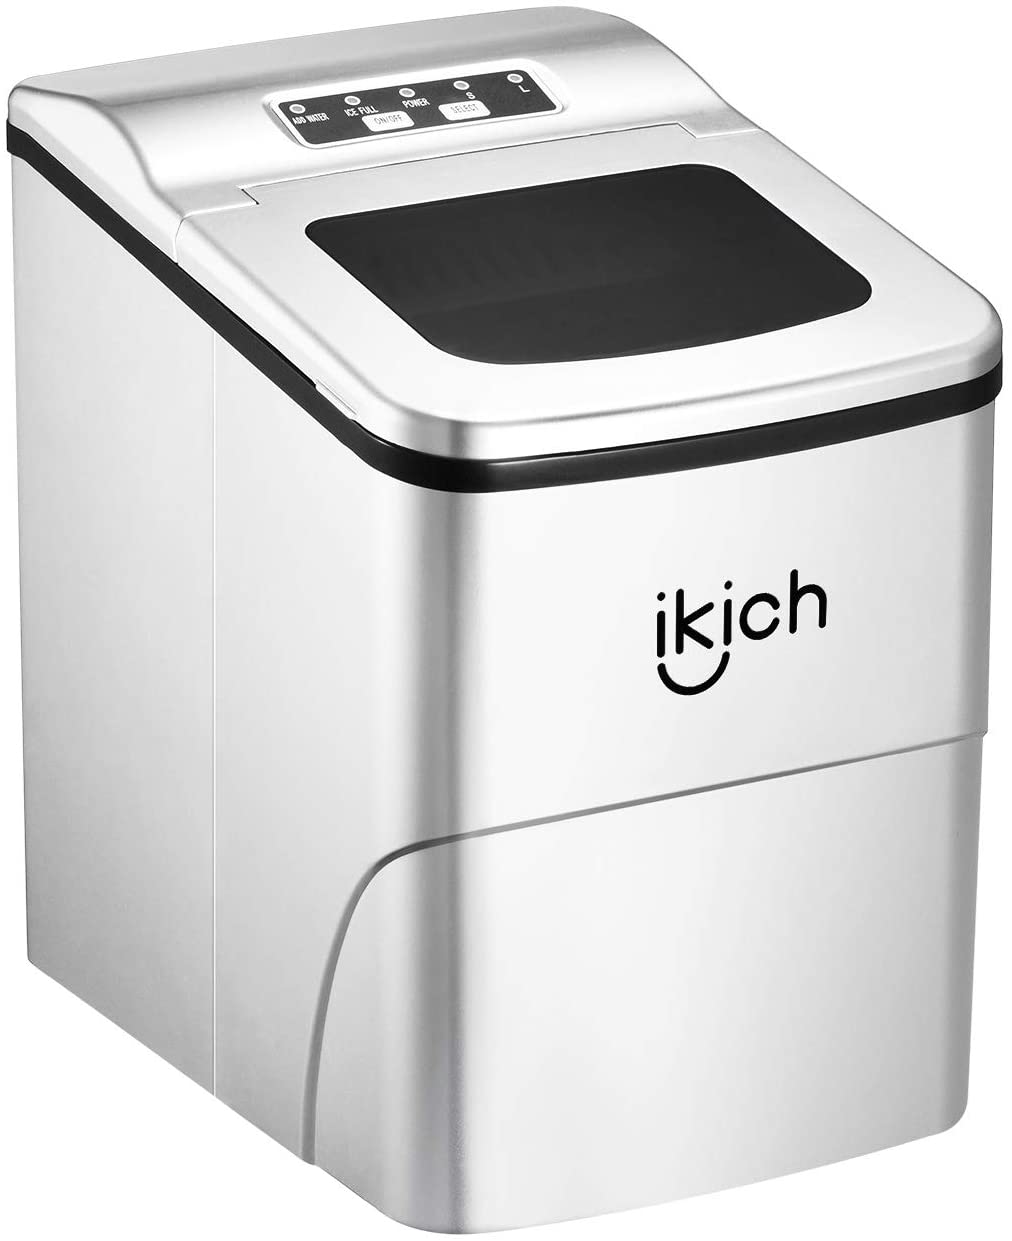 IKICH Portable Ice Maker Machine. Ice Cubes Ready in 6 Mins, Make 26 lbs Ice in 24 Hrs